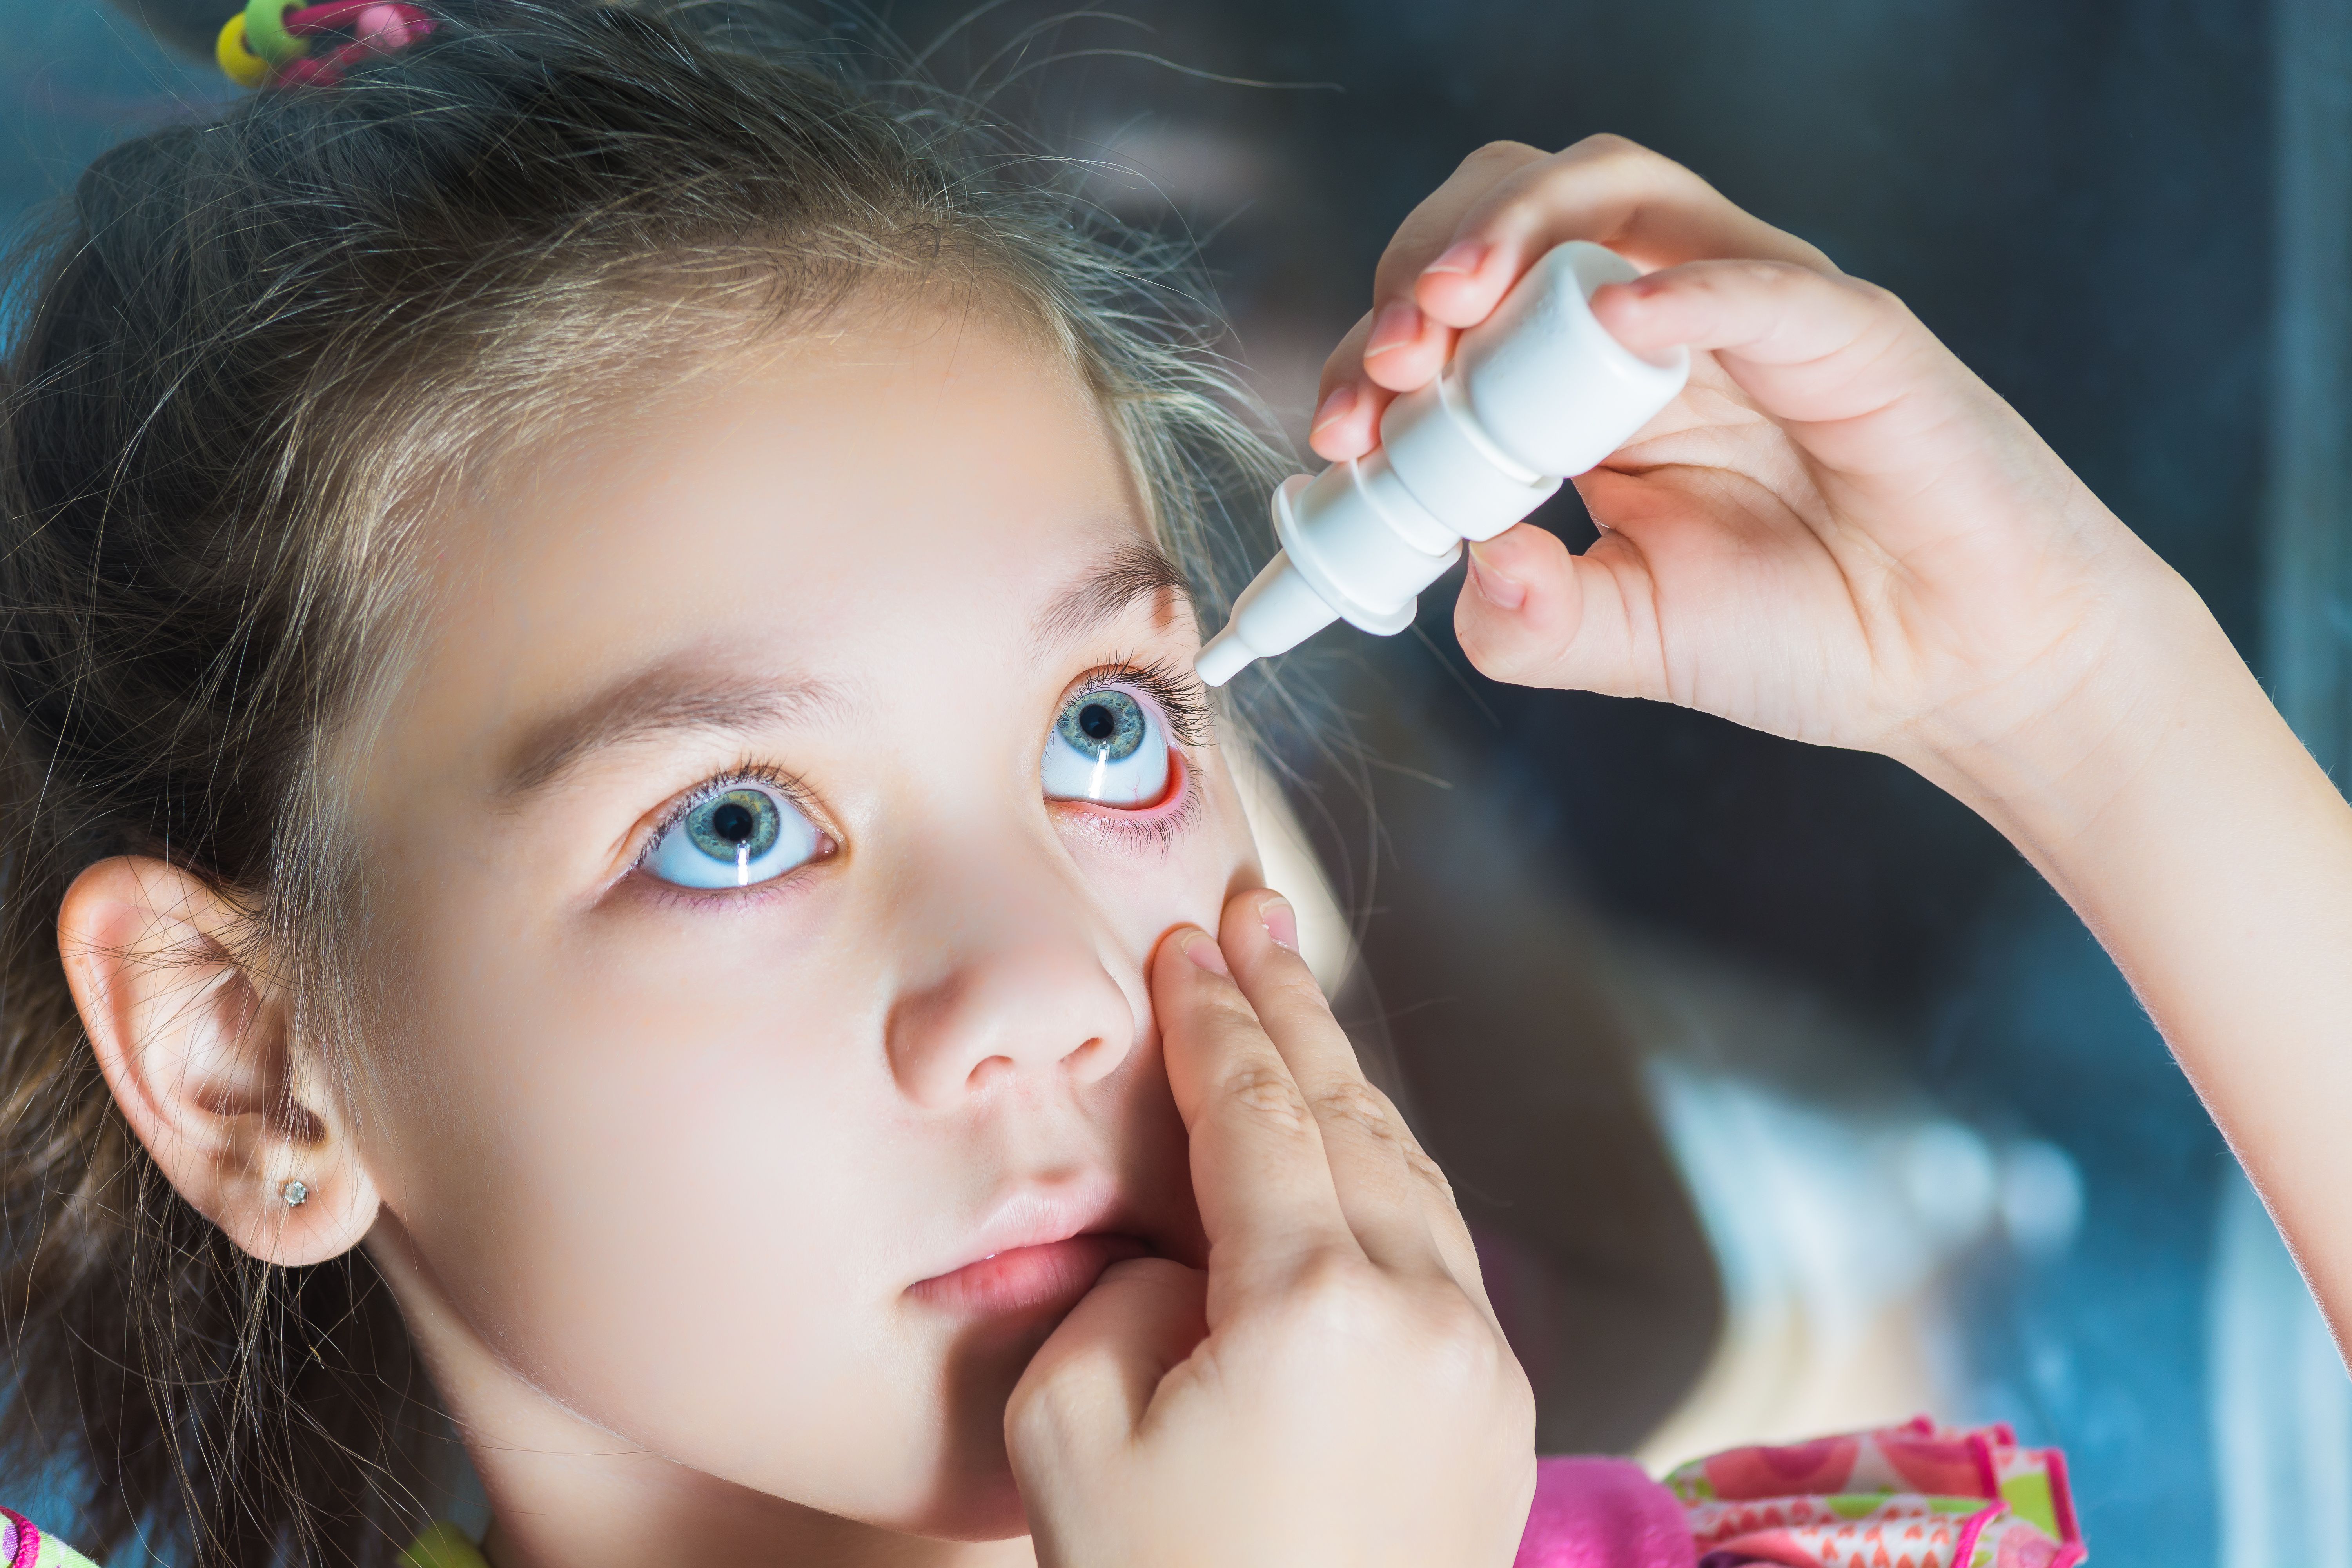 The goal of the research, according to the study, was to evaluate the efficacy of low-concentration atropine eyedrops at 0.05% and 0.01% concentration for delaying the onset of myopia. (Adobe Stock image)